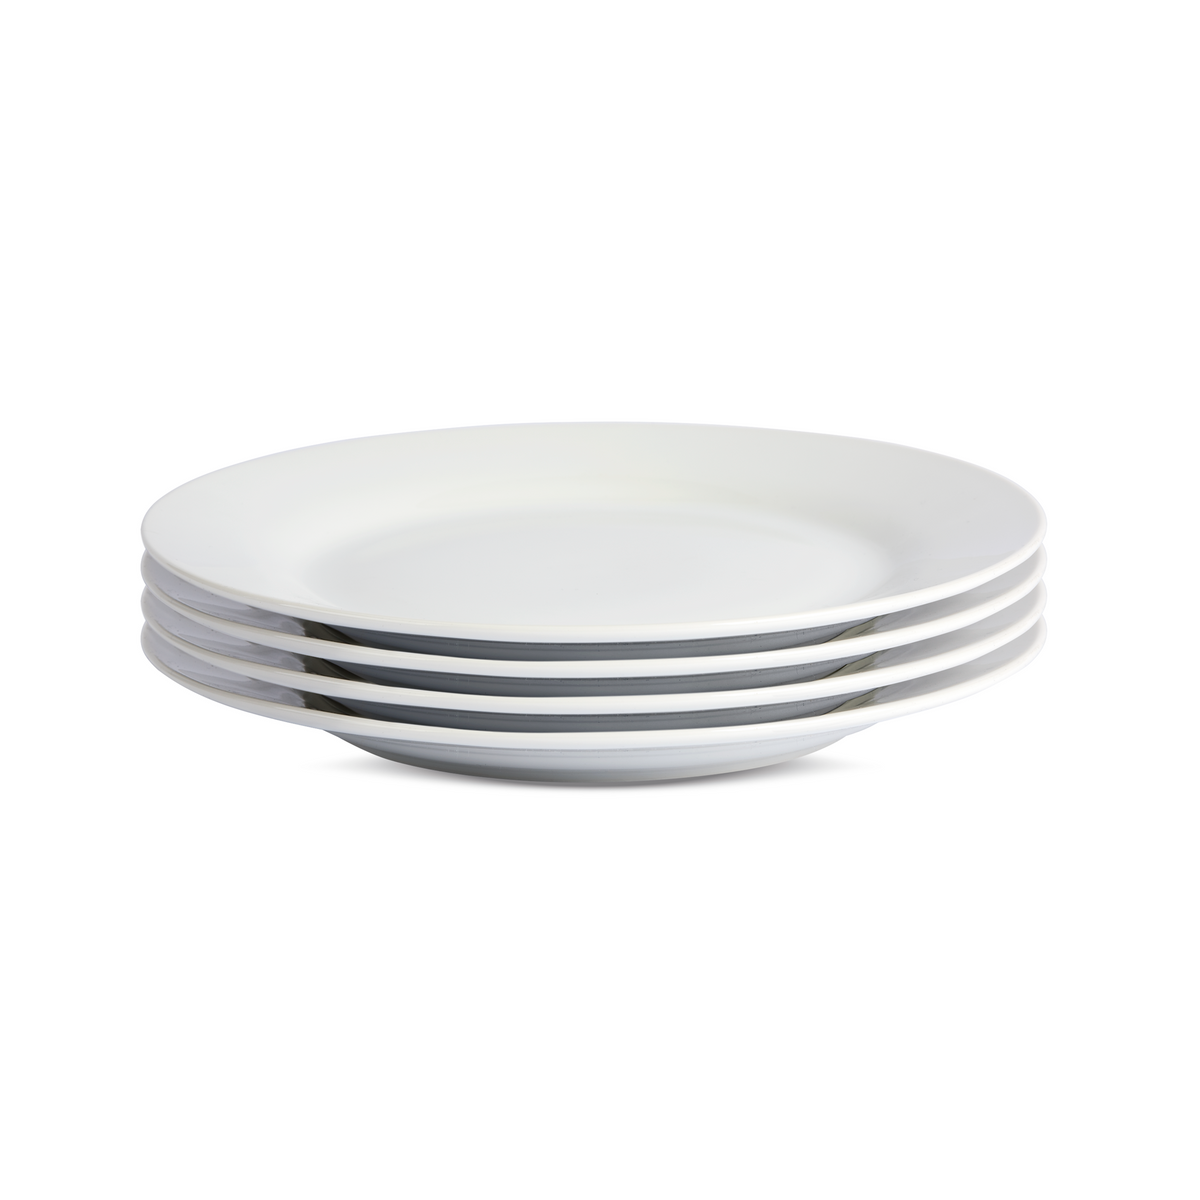 Side view, 4 stacked white porcelain dinner plates showing efficient storage.